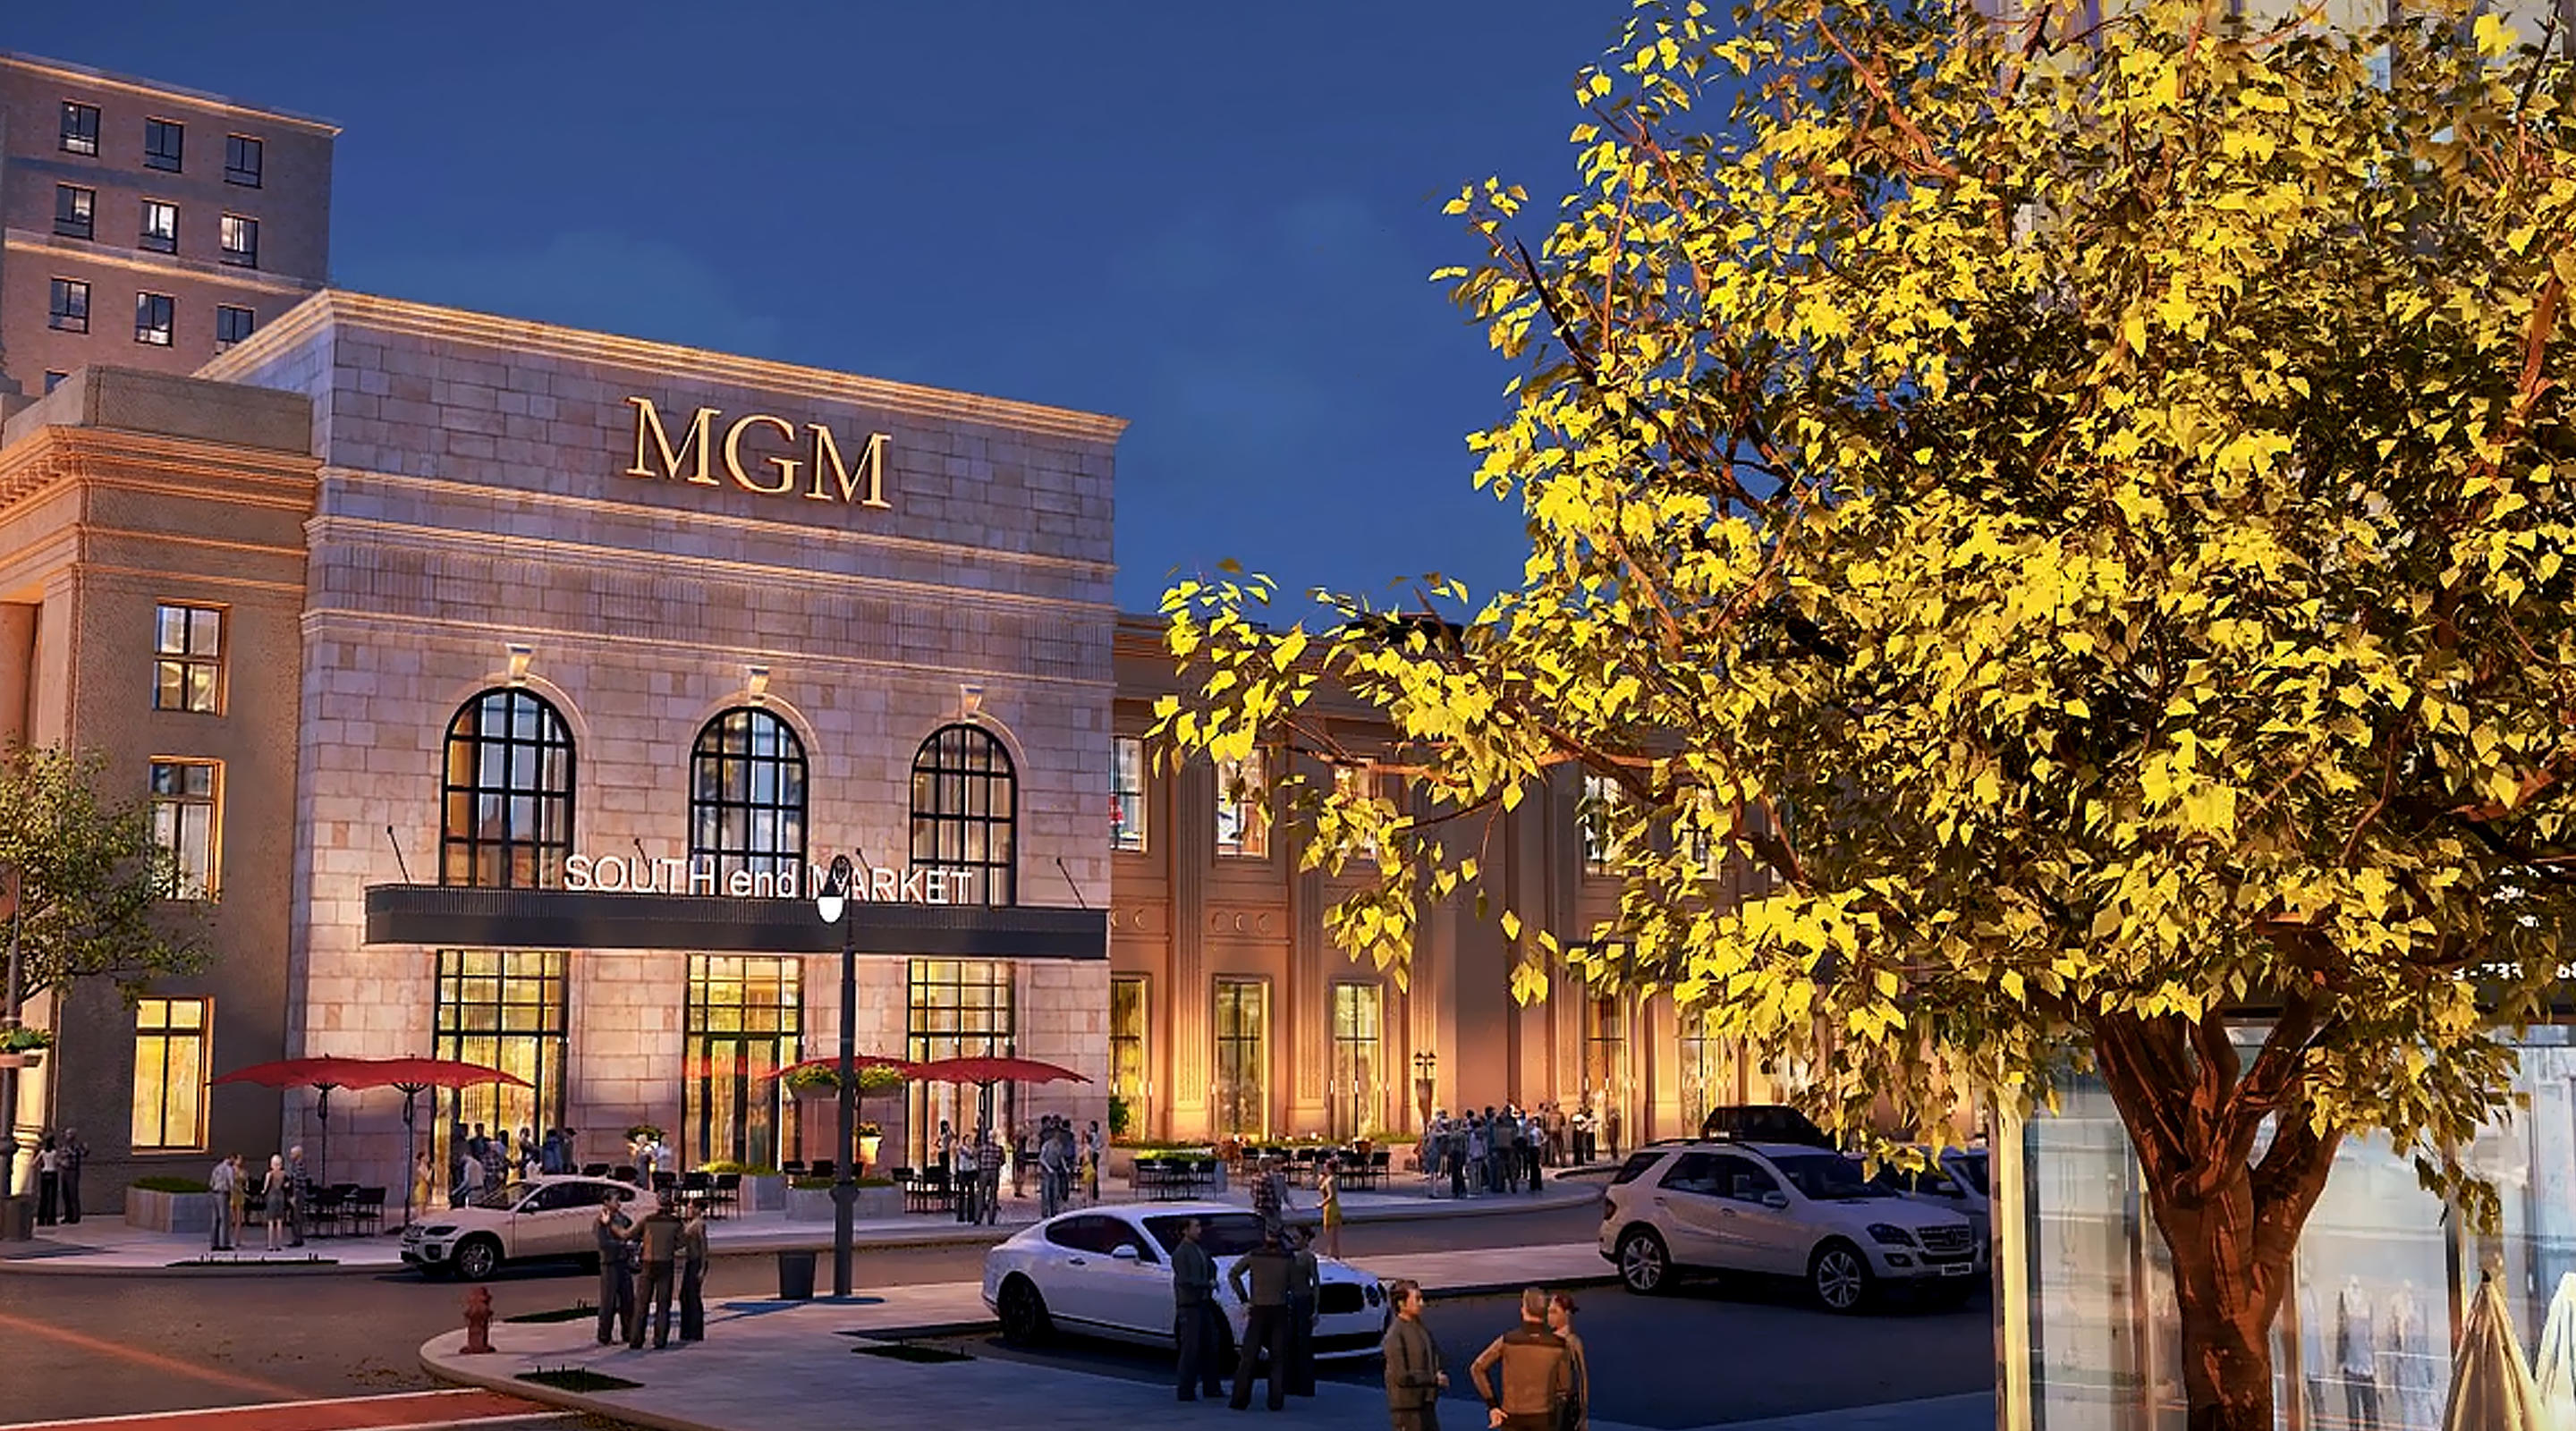 who owns mgm casino in springfield mass